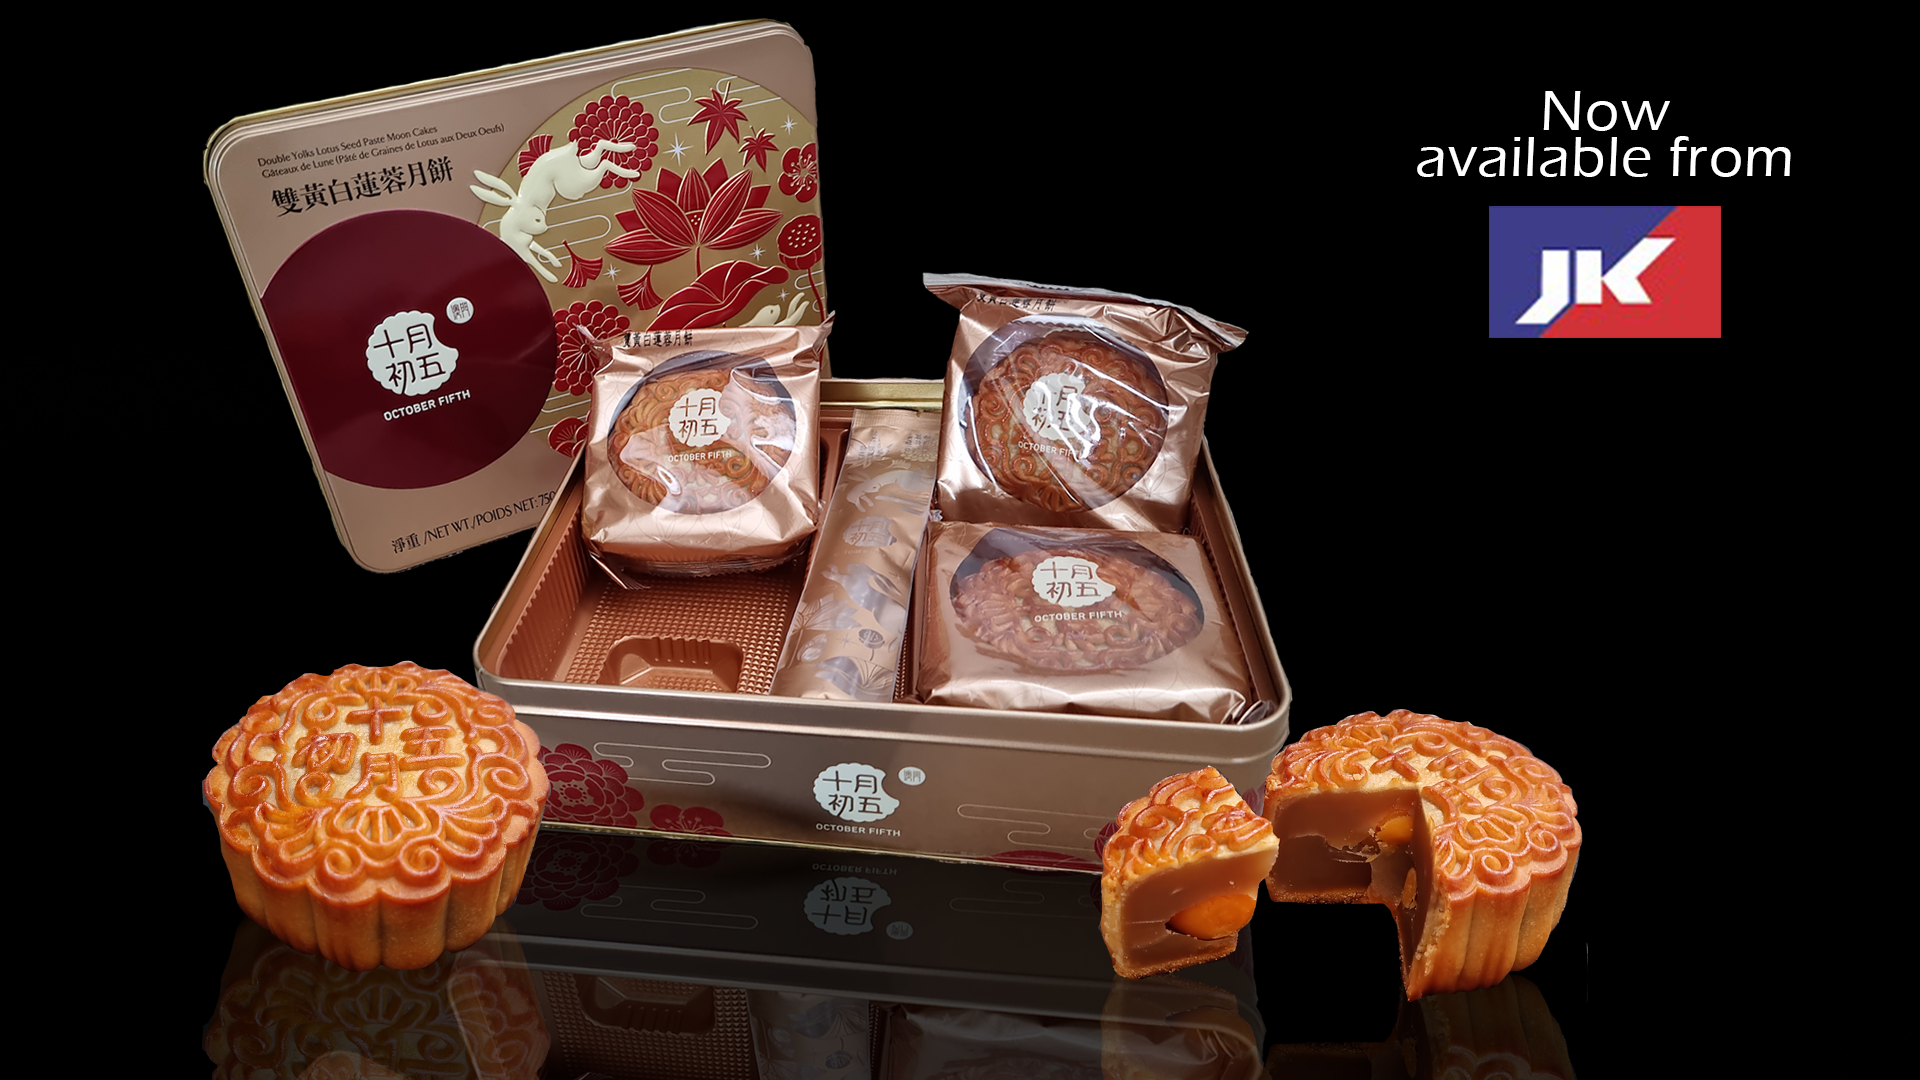 Mooncakes hit the UK in time for traditional Chinese festival